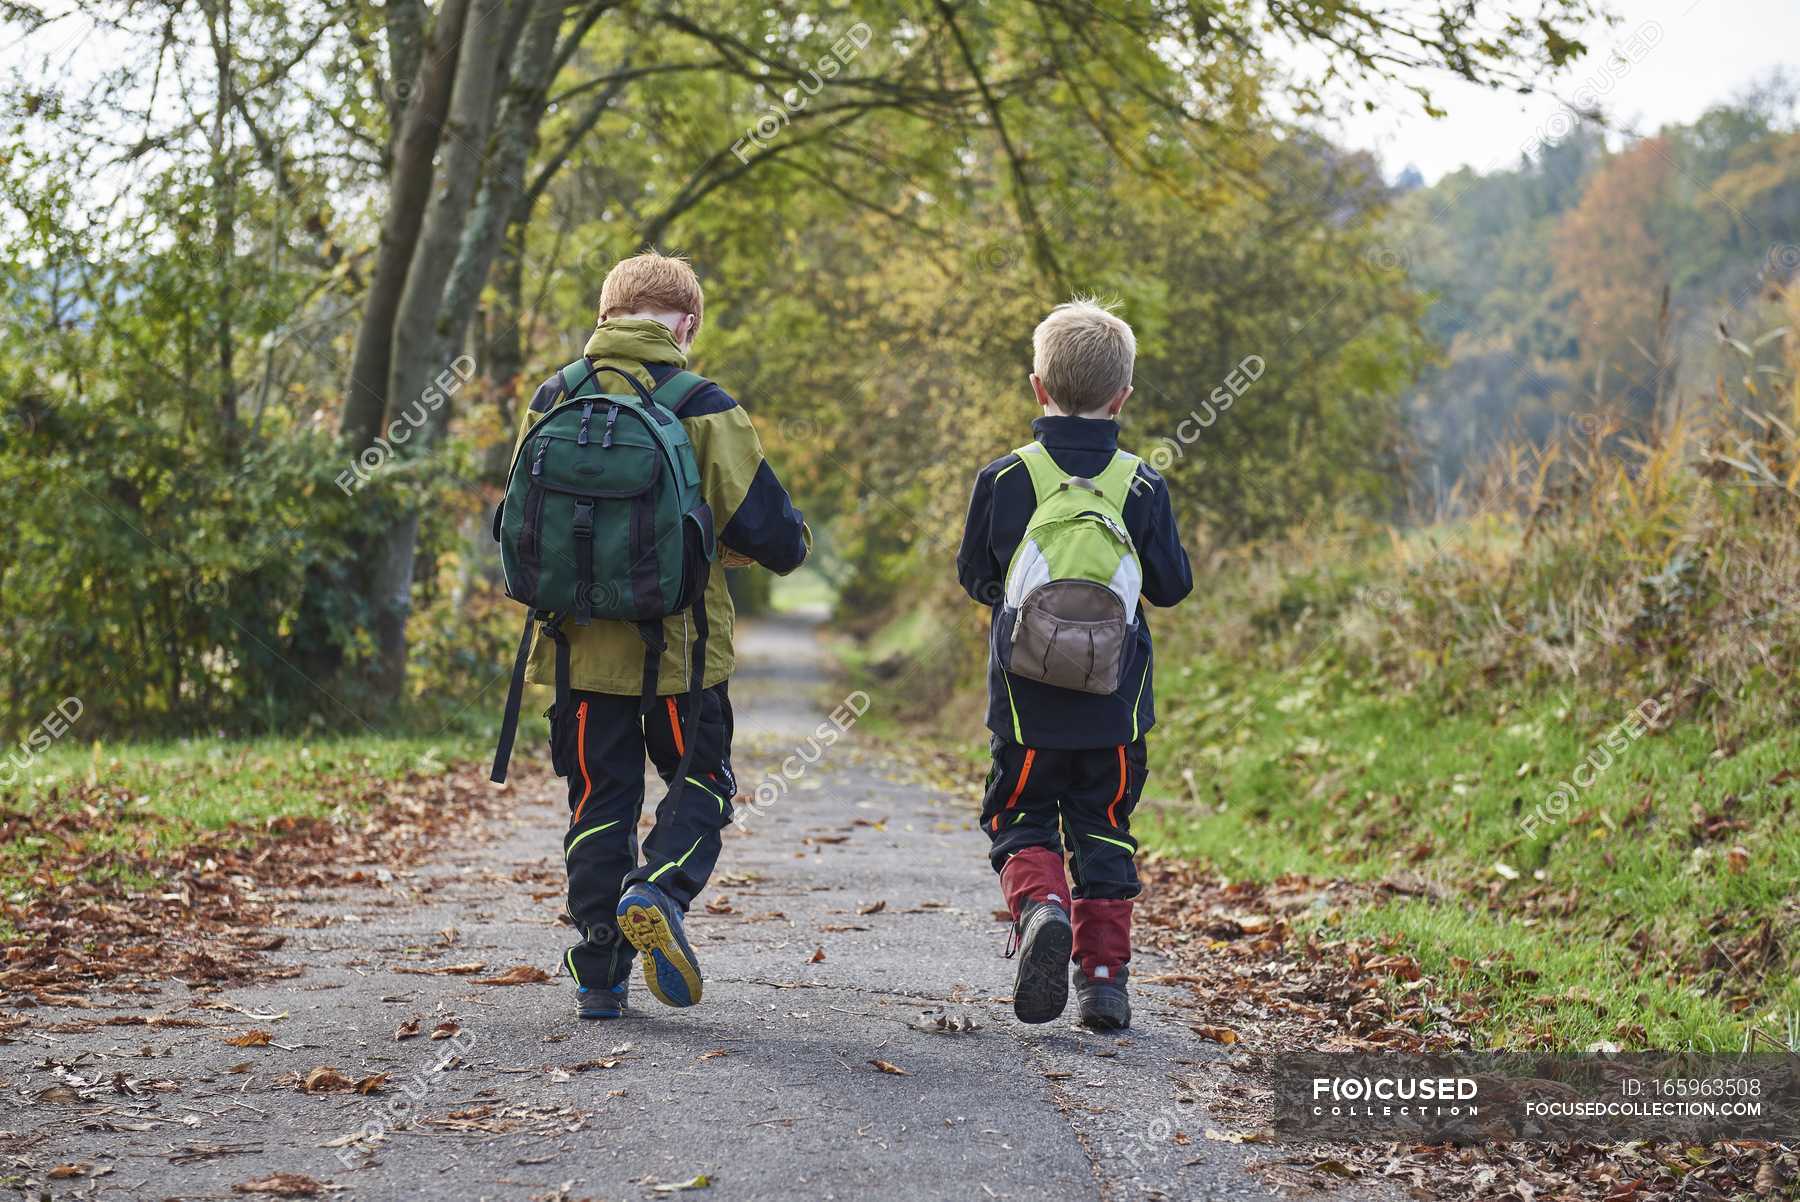 Two boys walking through forest with backpacks, rear view — best friends,  Strolling - Stock Photo | #165963508